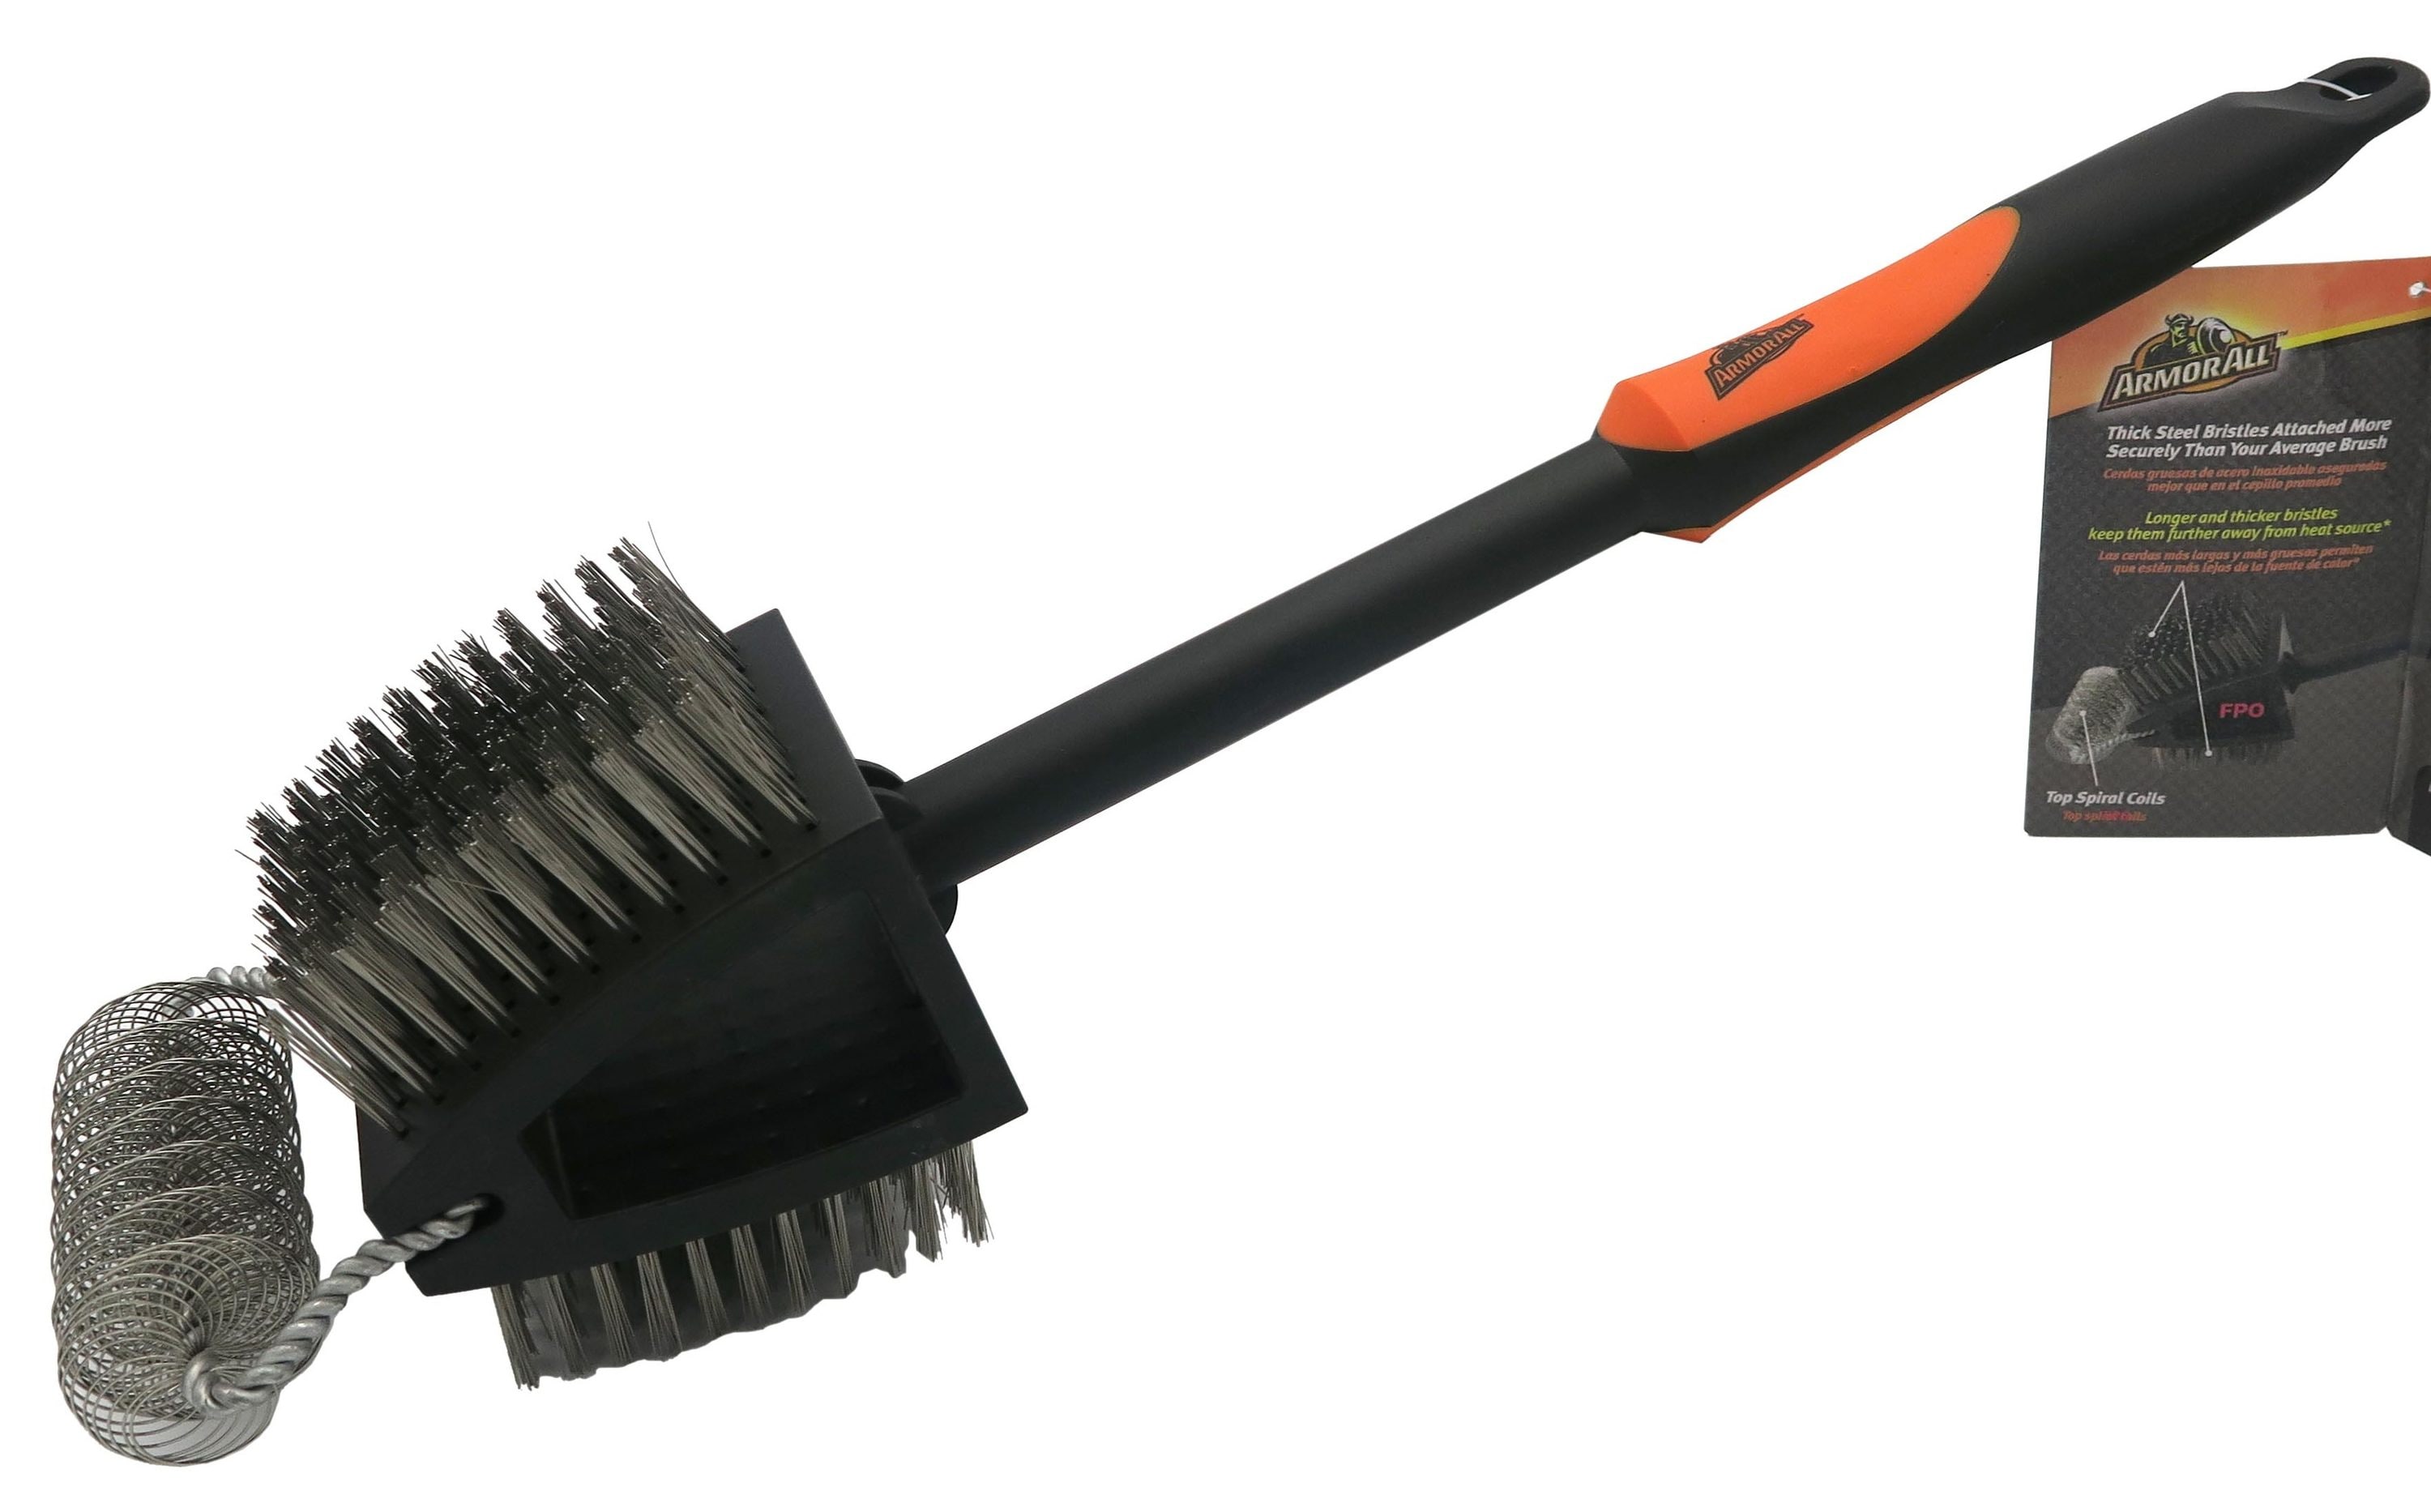 Pit Boss® Soft Touch Extended Cleaning Brush